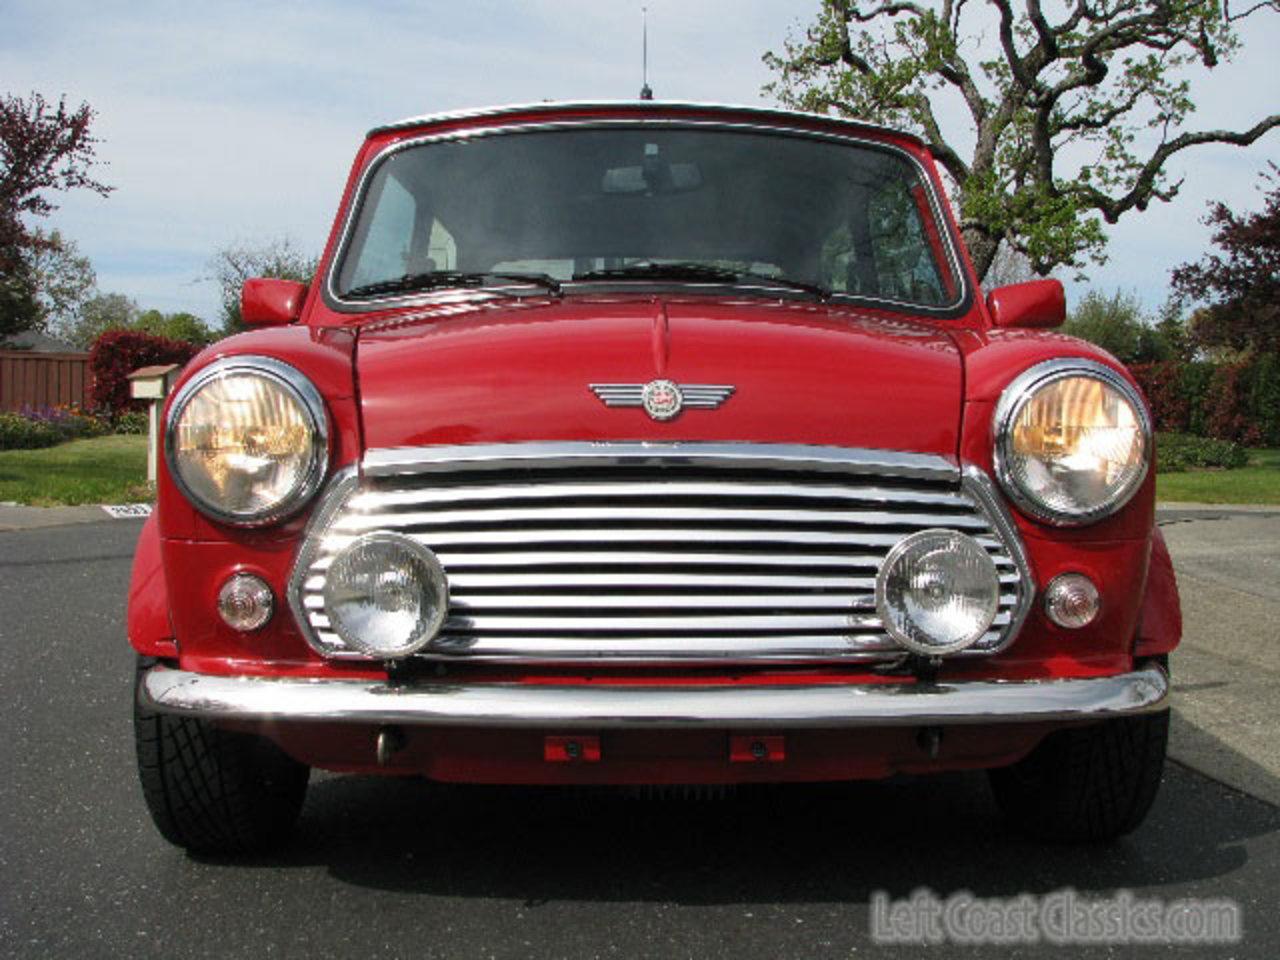 mini cooper old related images,101 to 150 - Zuoda Images